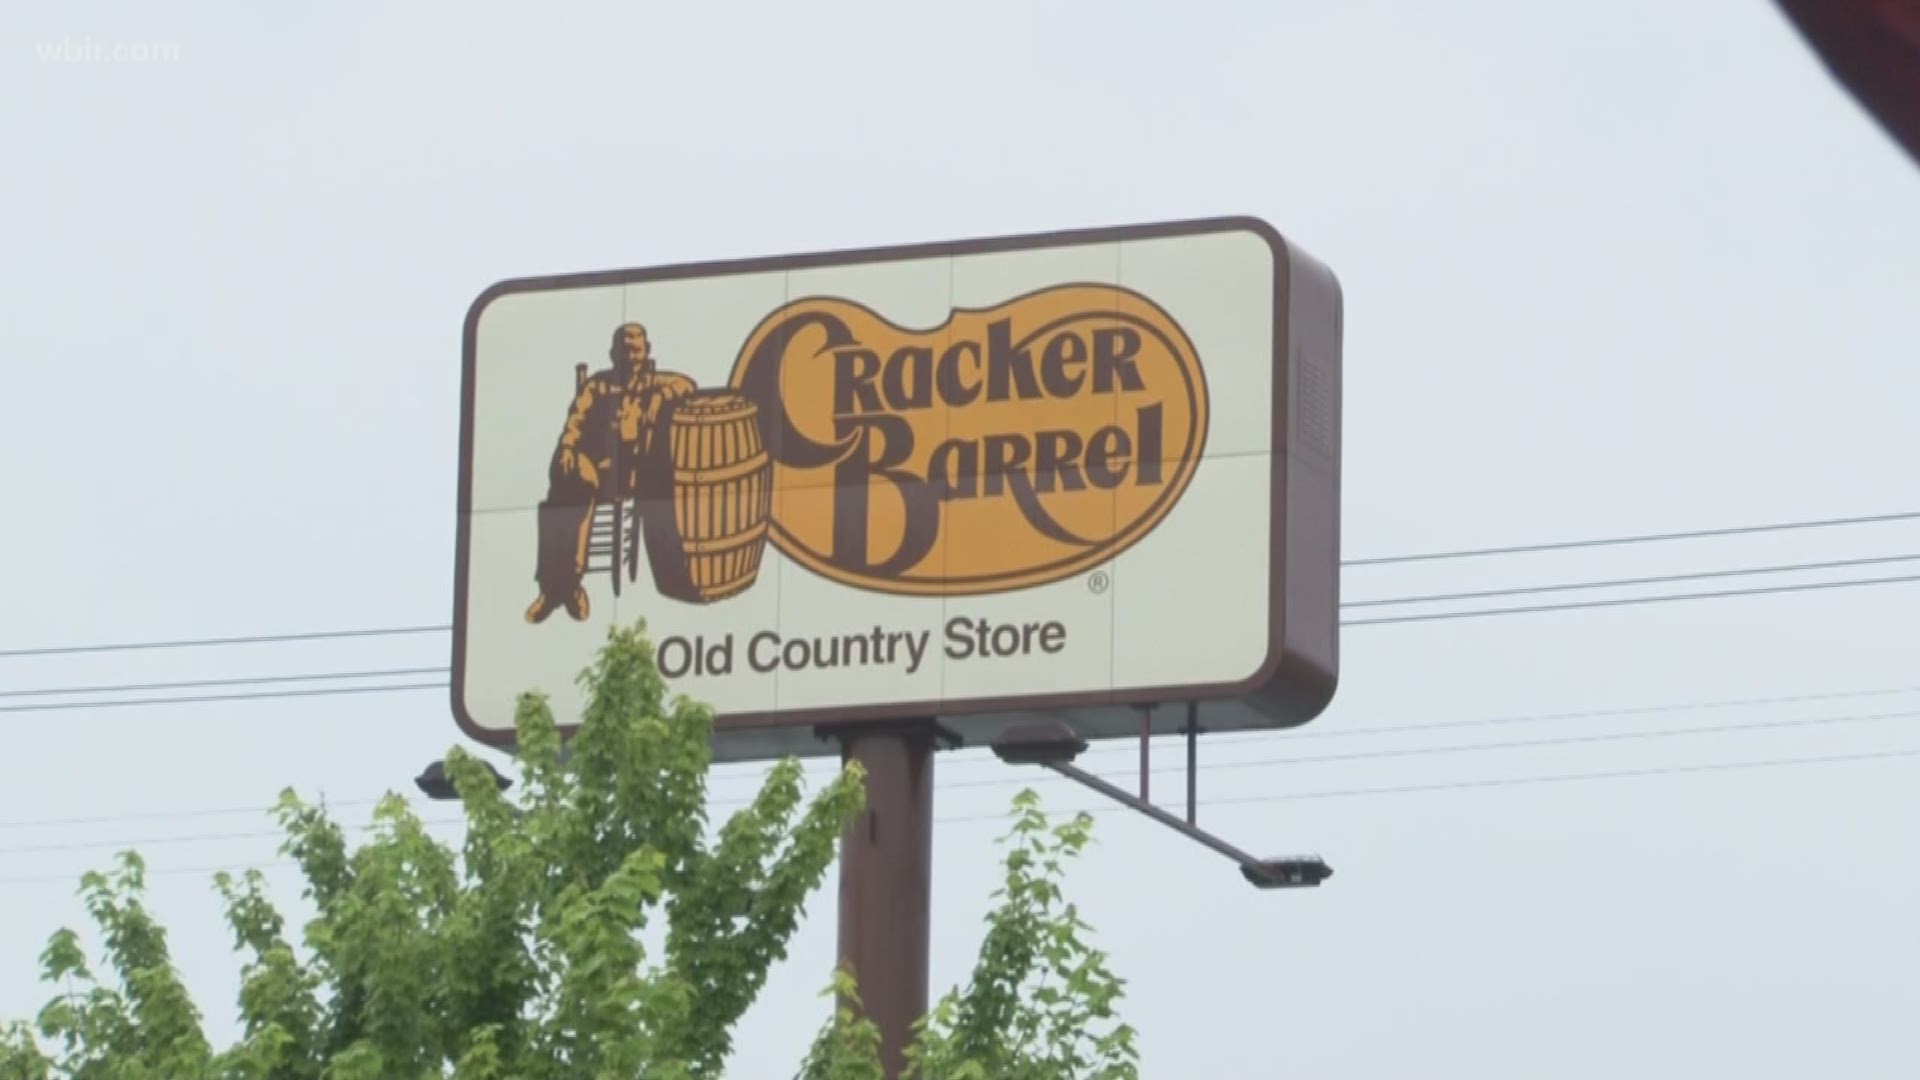 McKensi Burchell was eating at the Cracker Barrel on Millertown Pike when a sever said "look out the window!"